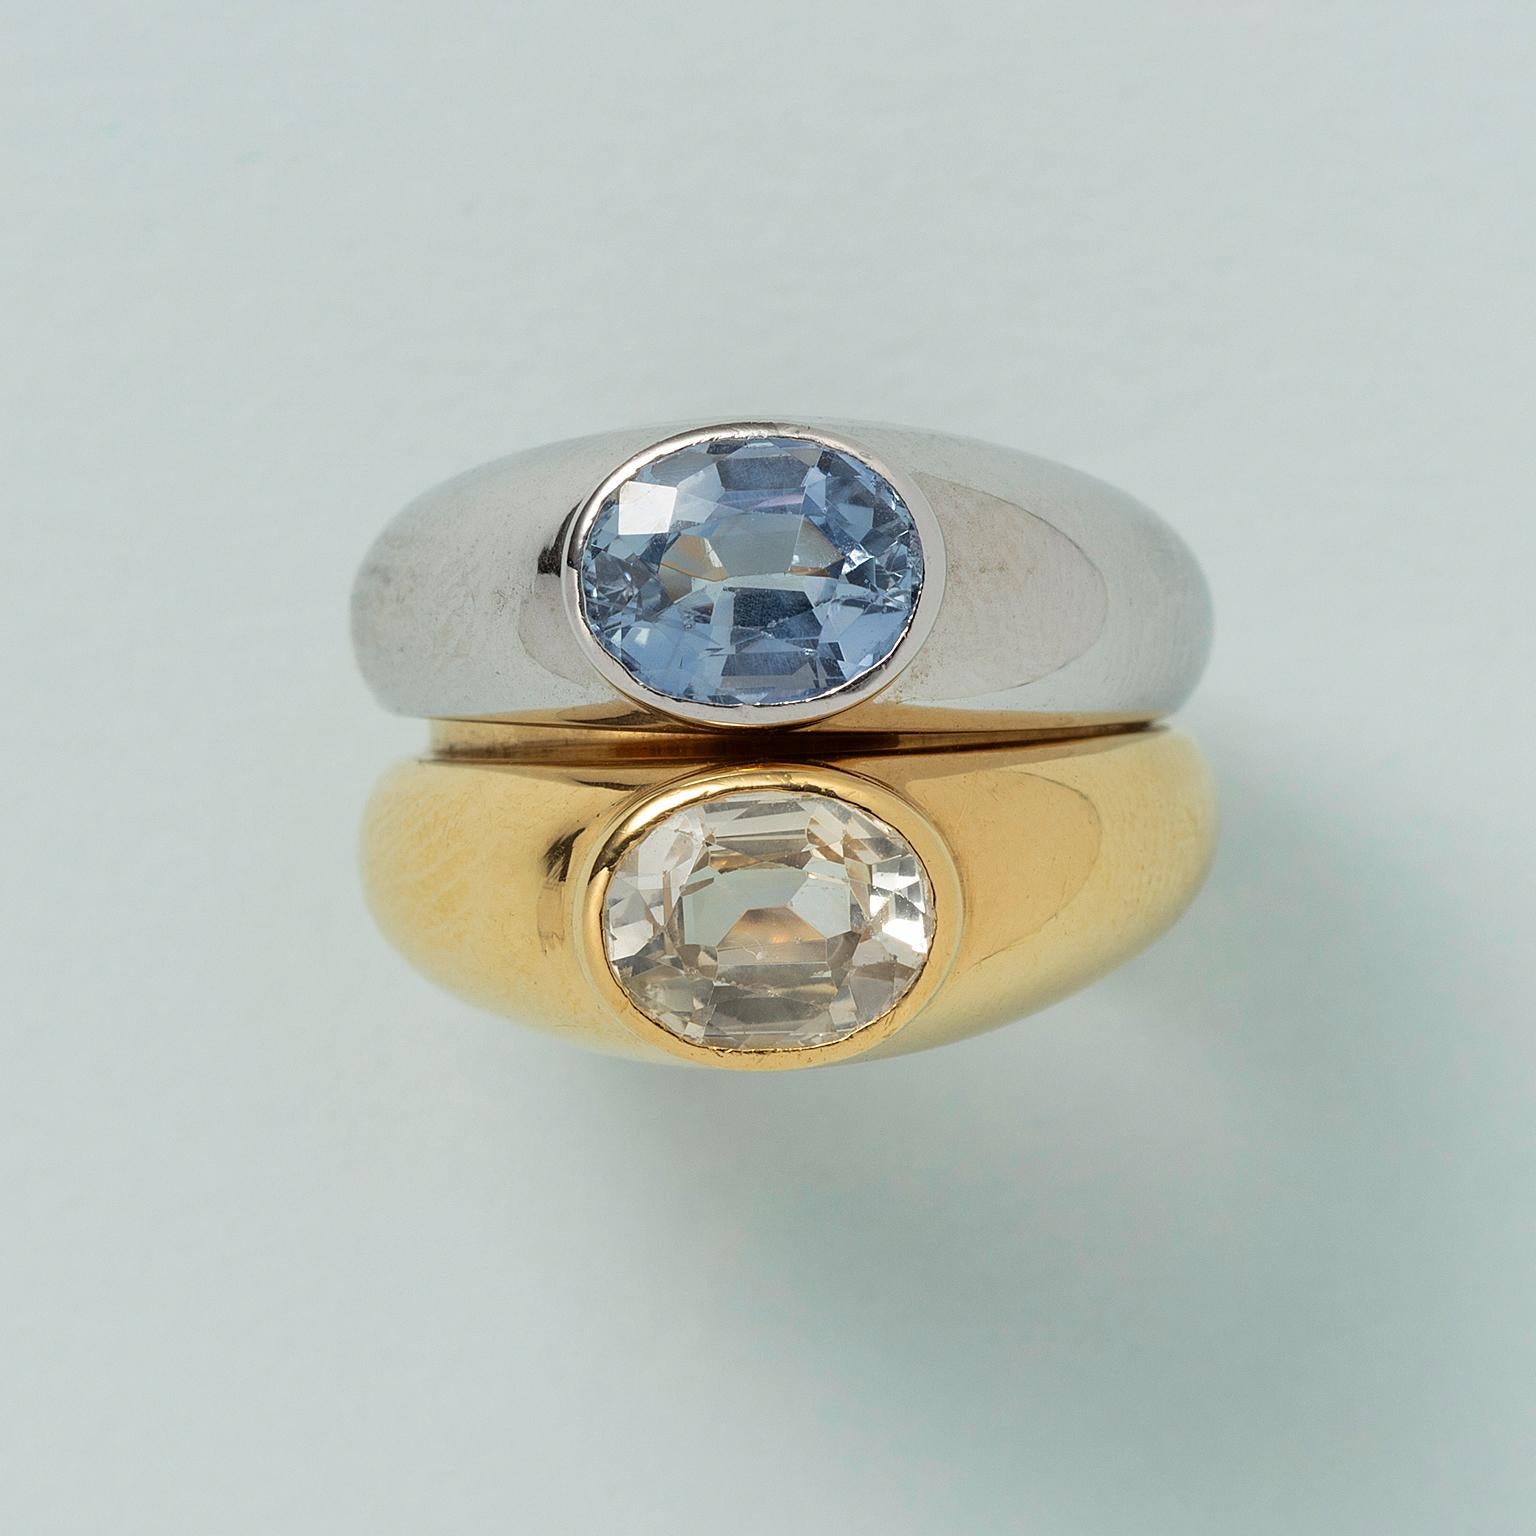 A set of two 18 carat gold rings, one white gold and one yellow gold, that fit into each other and can be worn together or separately, each is set with an oval-facetted sapphire, one slightly blue-er than the other, (app 3 carats in total), marked